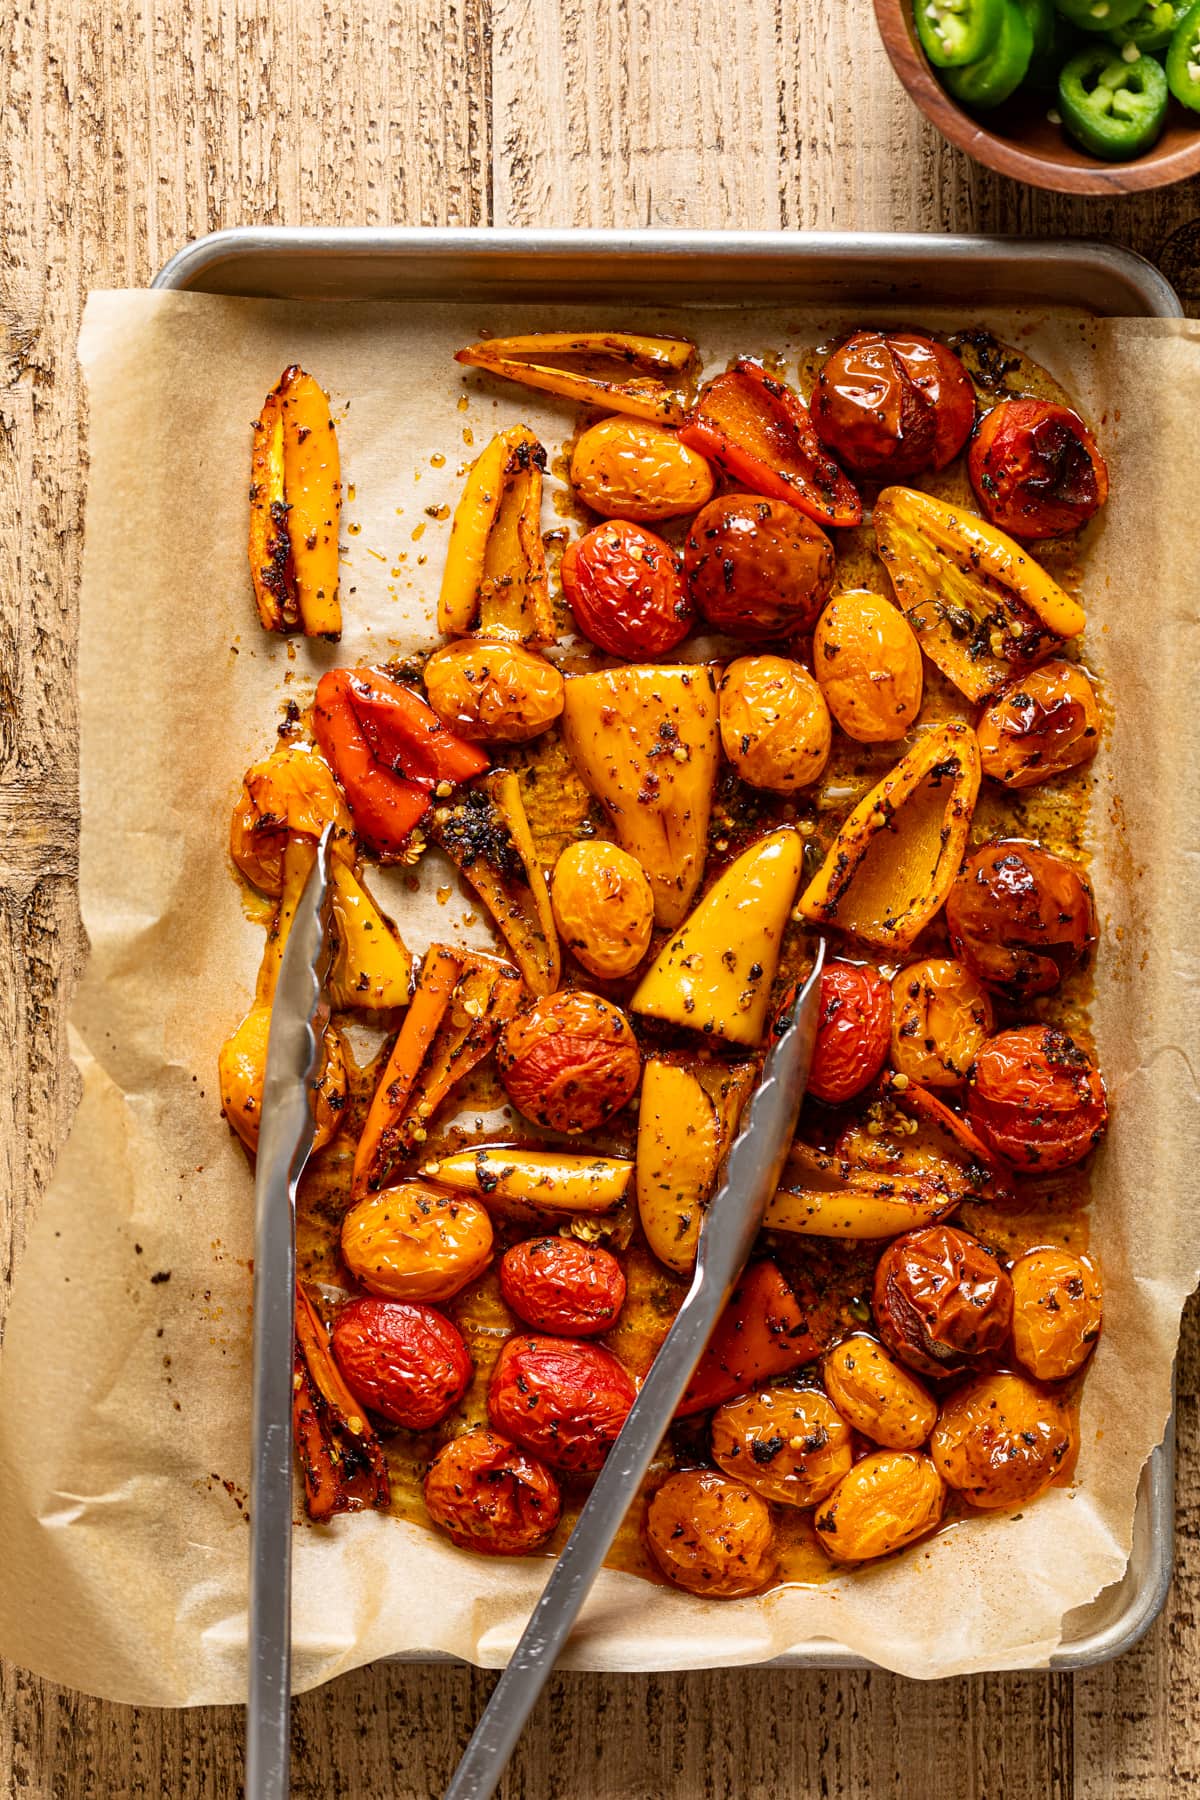 Tongs on a baking sheet of roasted peppers and tomatoes